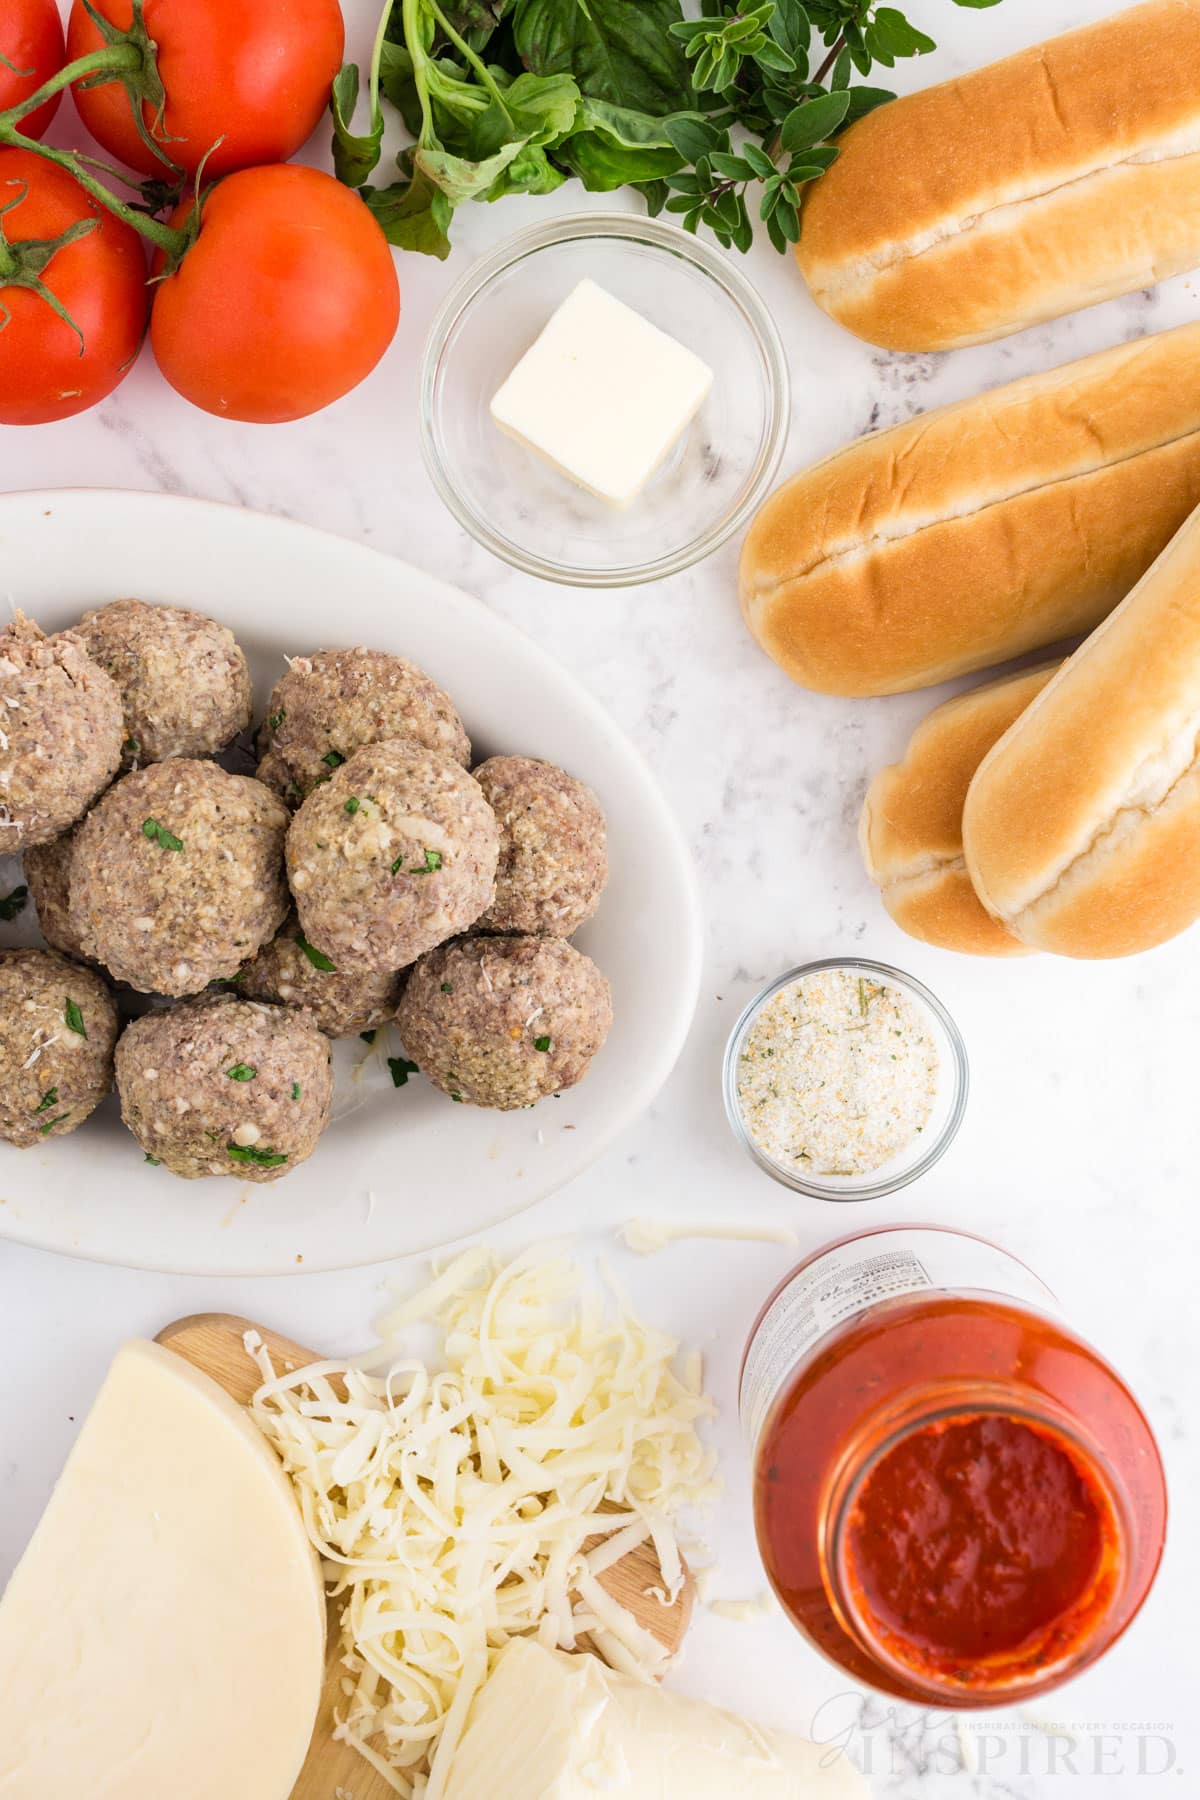 Plate of meatballs, wooden kitchen board with shredded cheese, marinara sauce, bread buns, tomatoes, basil, bowl of butter, garlic powder, on a marble countertop.